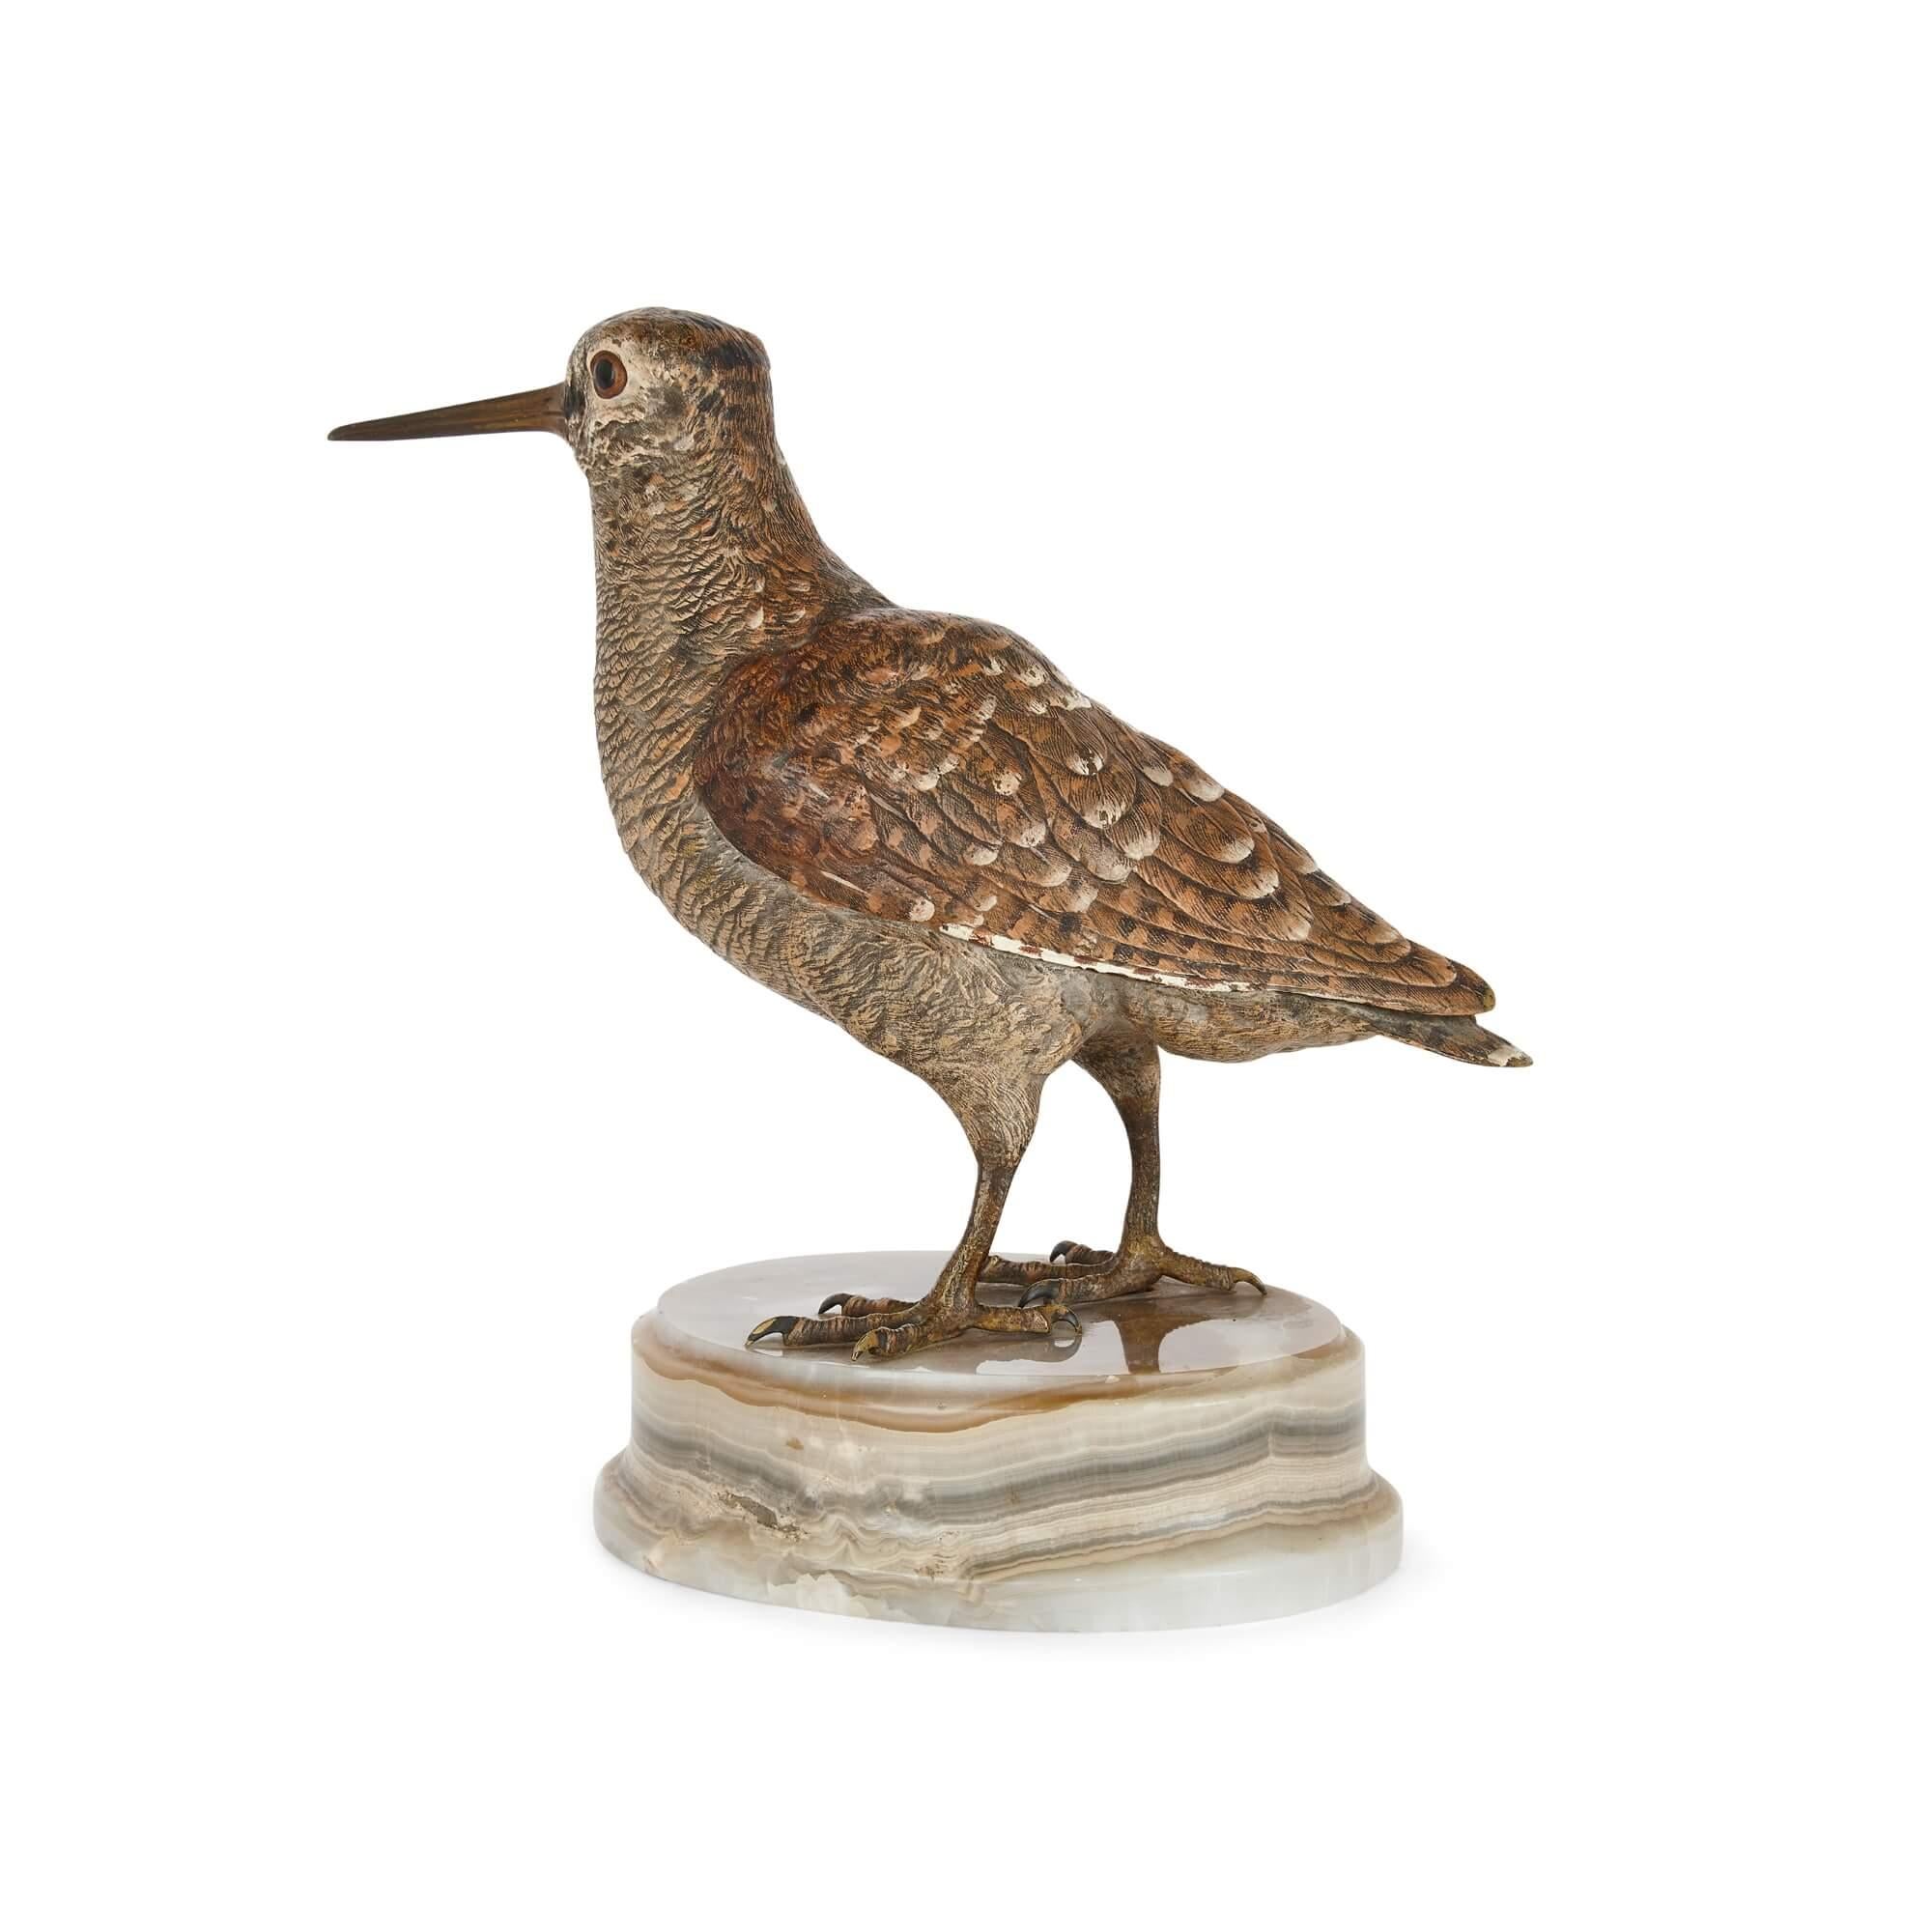 A large cold painted bronze Viennese model of a woodcock by Bergman
Austrian, c.1910
Measures: Height 21cm, width 23cm, depth 10.5cm

Produced in the foundry of Franz Xaver Bergman in Vienna in the early years of the twentieth century, this